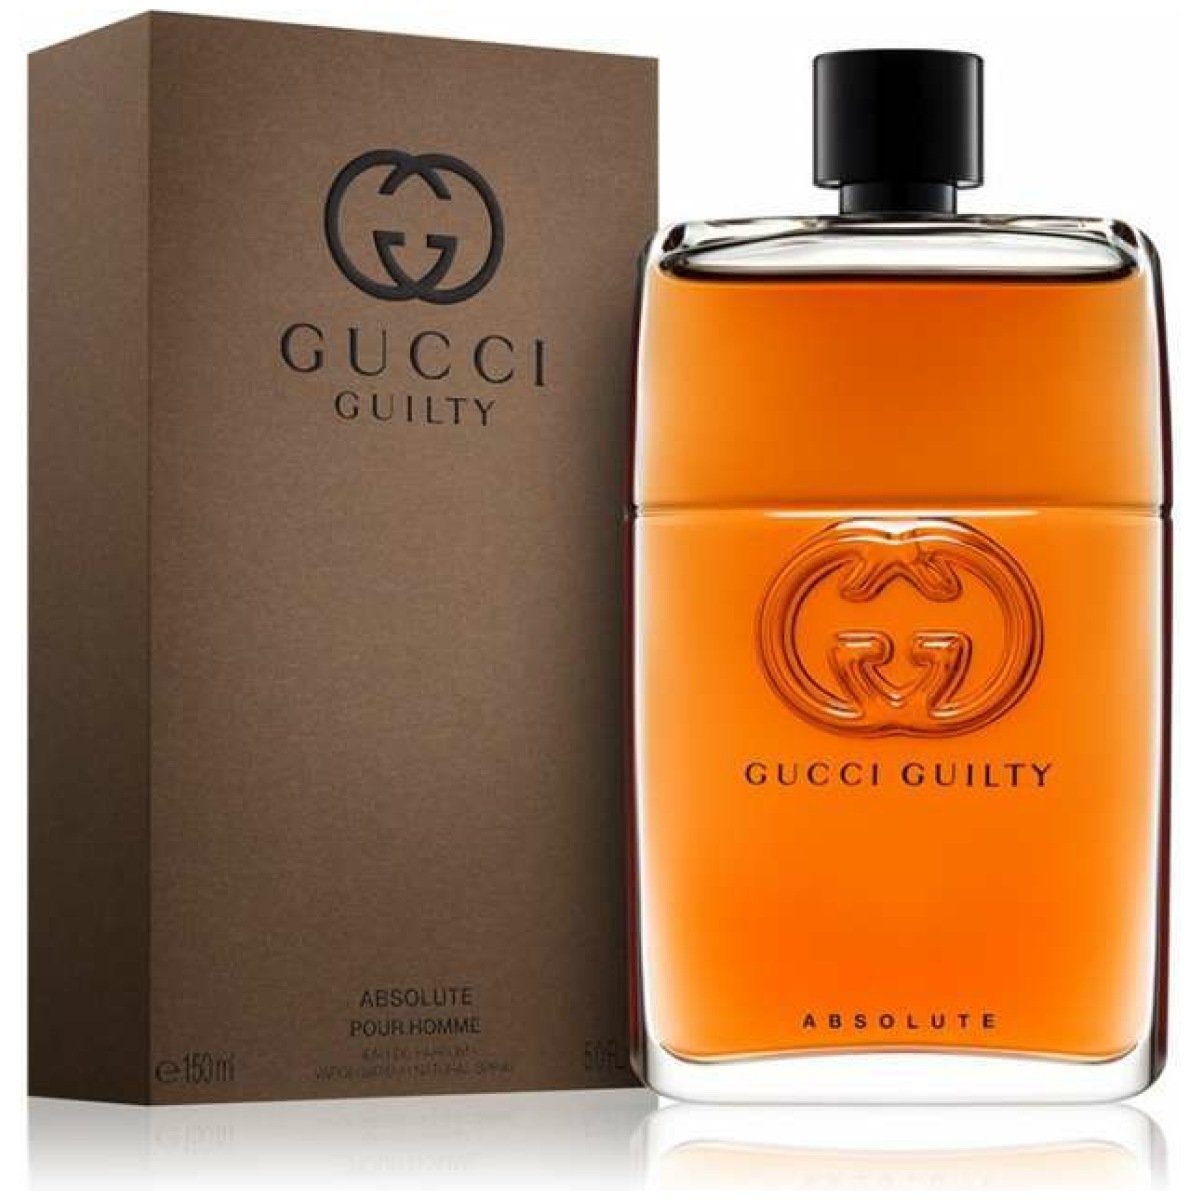 Gucci Guilty Absolute EDP Perfume For Men 150ml